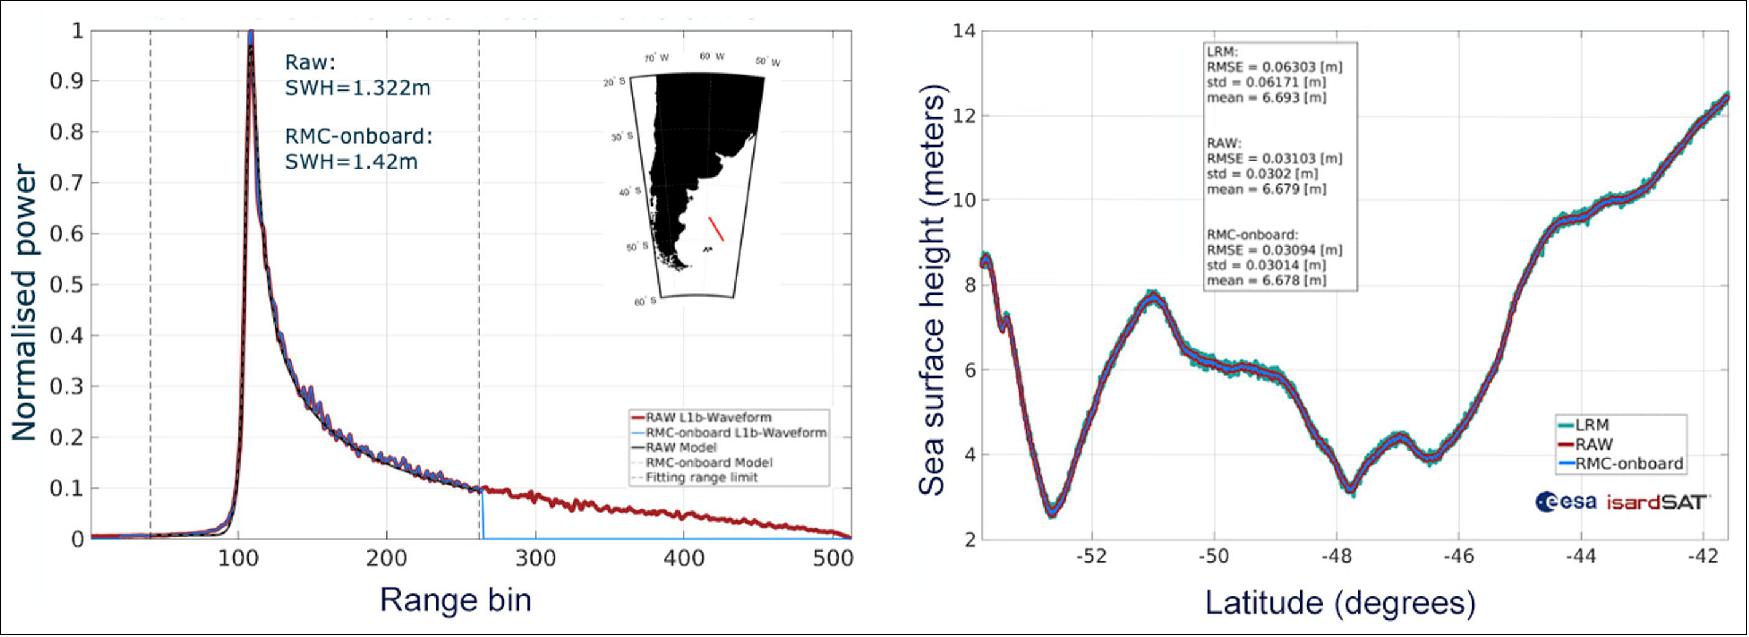 Figure 27: Copernicus Sentinel-6 first waveform results. Left: The image shows a comparison between normalized data processed on board Copernicus Sentinel-6 and downlinked (blue line), compared to full raw (SAR-RAW) data processed on the ground (red line). By removing the trailing edge of the data before being transmitted to Earth, the data rate is reduced by 50% (SAR-RMC) (Range Migration Compensation). High fidelity low-noise data are thanks to Sentinel-6's Poseidon-4 digital instrument architecture, which is a first. There are no significant differences in geophysical parameter retrieval performance, and the onboard processing demonstrates expected performance. Right: Example of sea-surface height measurements processed by the ESA Level-2 Ground Prototype Processor showing Low Resolution Mode, SAR-RAW and SAR-RMC data over a transect in the Southeast Atlantic Ocean. Significant sea-surface height structure is visible in the data revealed by a very low noise signal. The improvement of synthetic aperture processing is evident in the data (image credit: ESA, the image contains modified Copernicus Sentinel data (2020), processed by ESA/isardSAT, CC BY-SA 3.0 IGO)